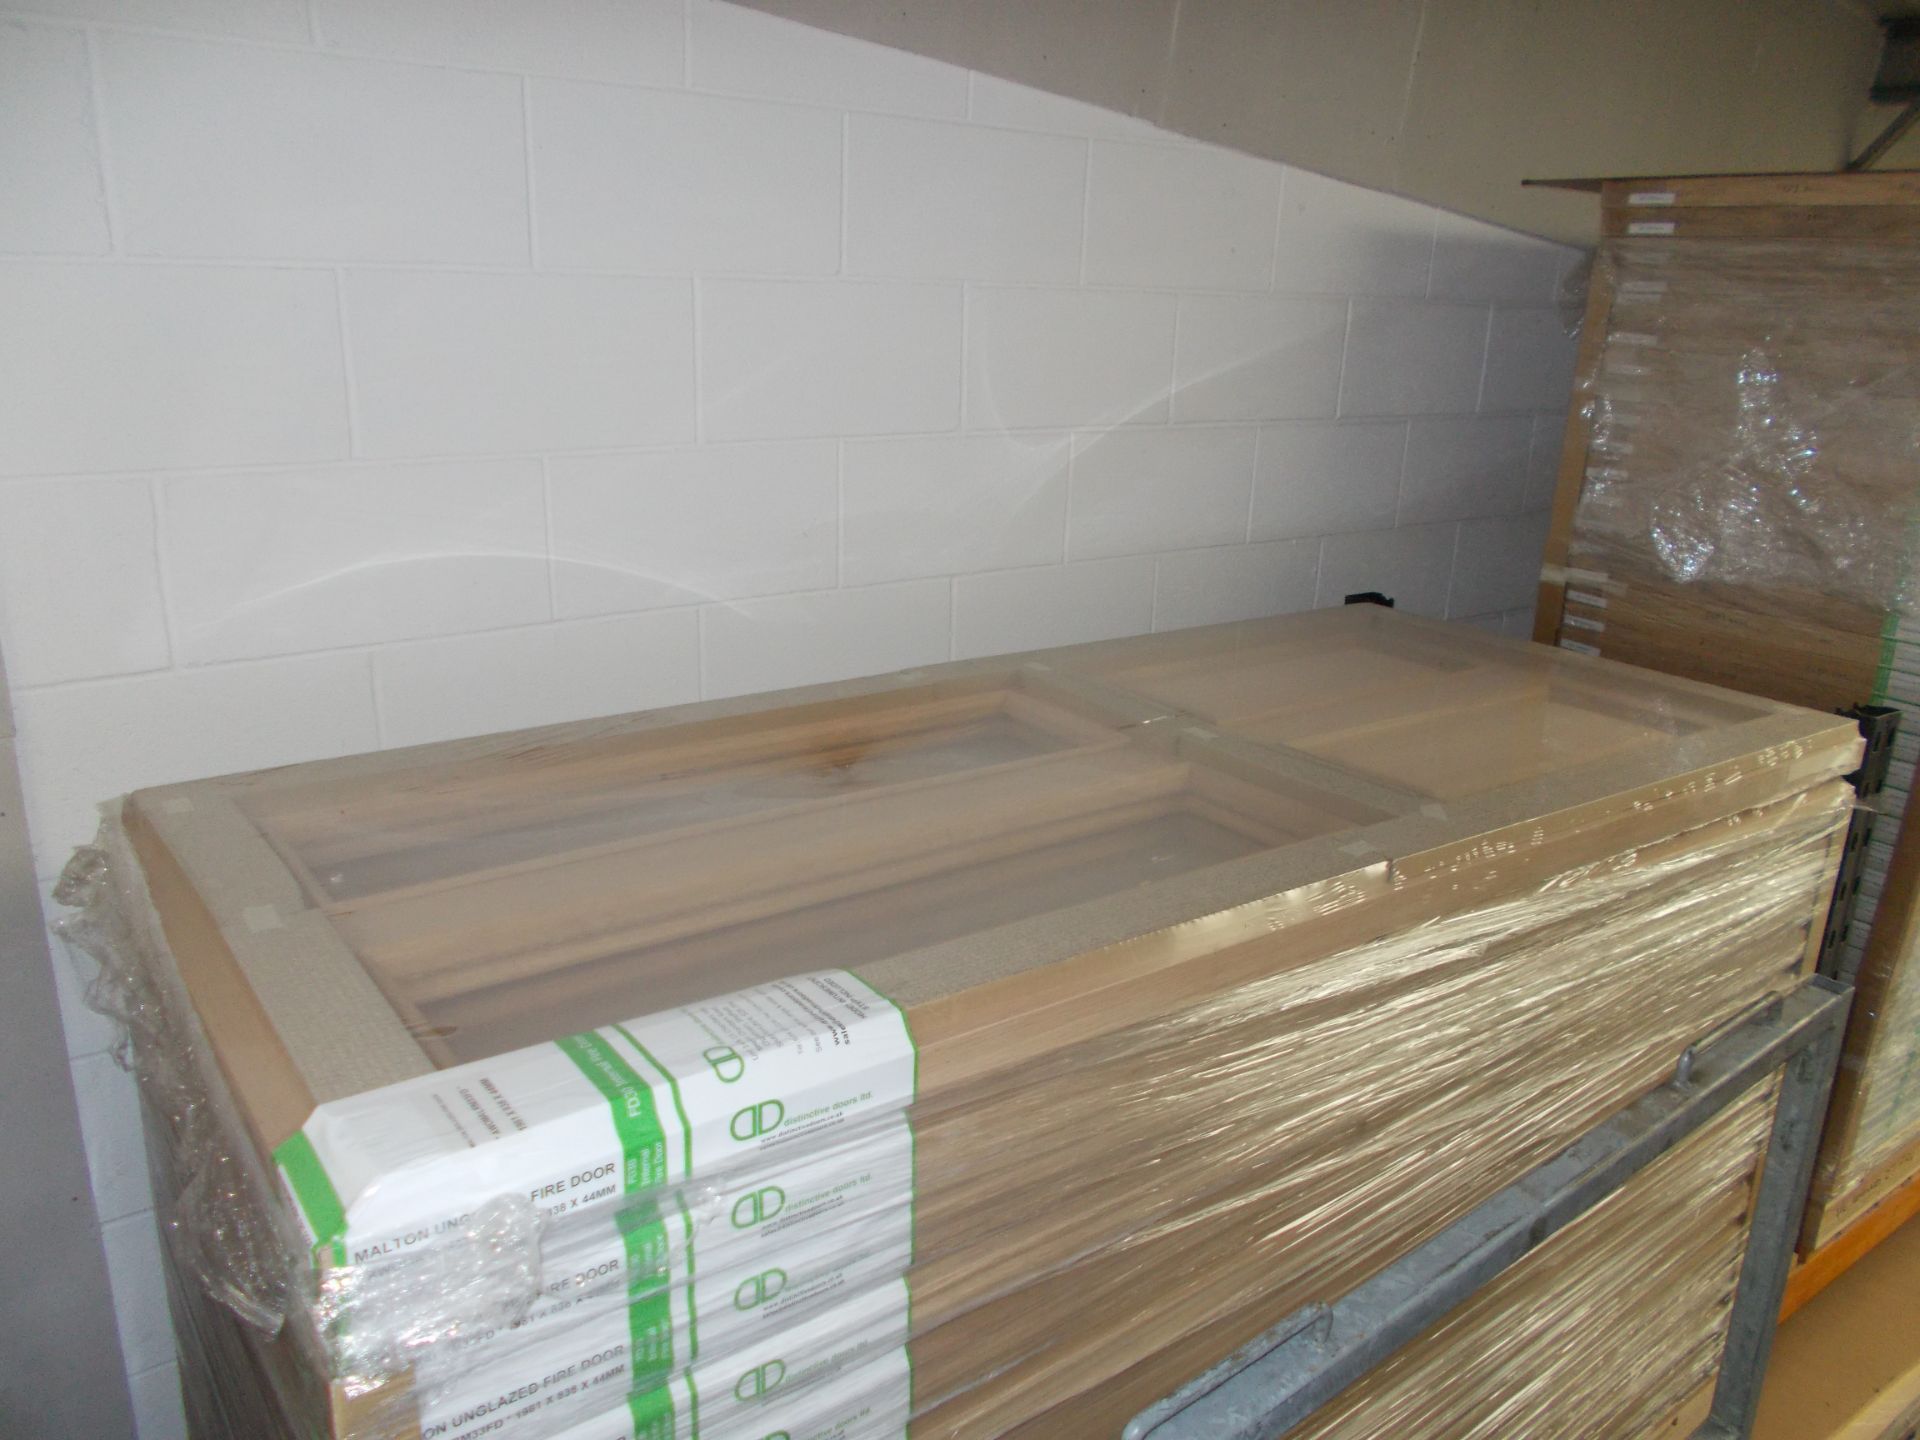 5 x Malton Unglazed Internal Fire Door AWOMALRM33FD, 1981x838x44mm - Lots to be handed out in